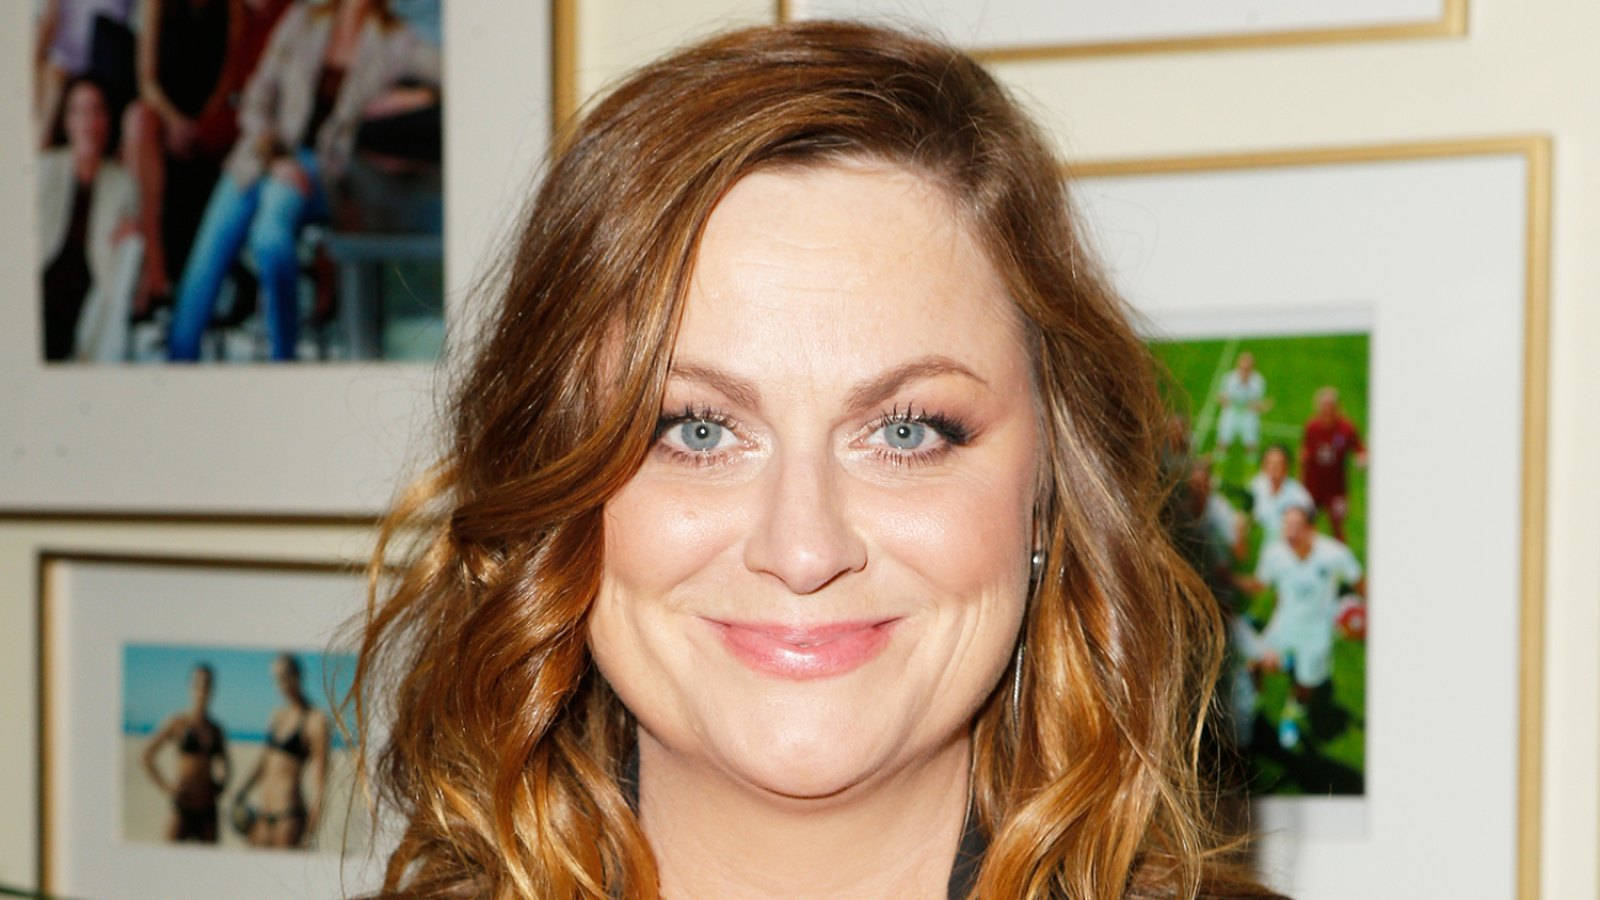 Amy Poehler, Renowned Television Actress And Producer